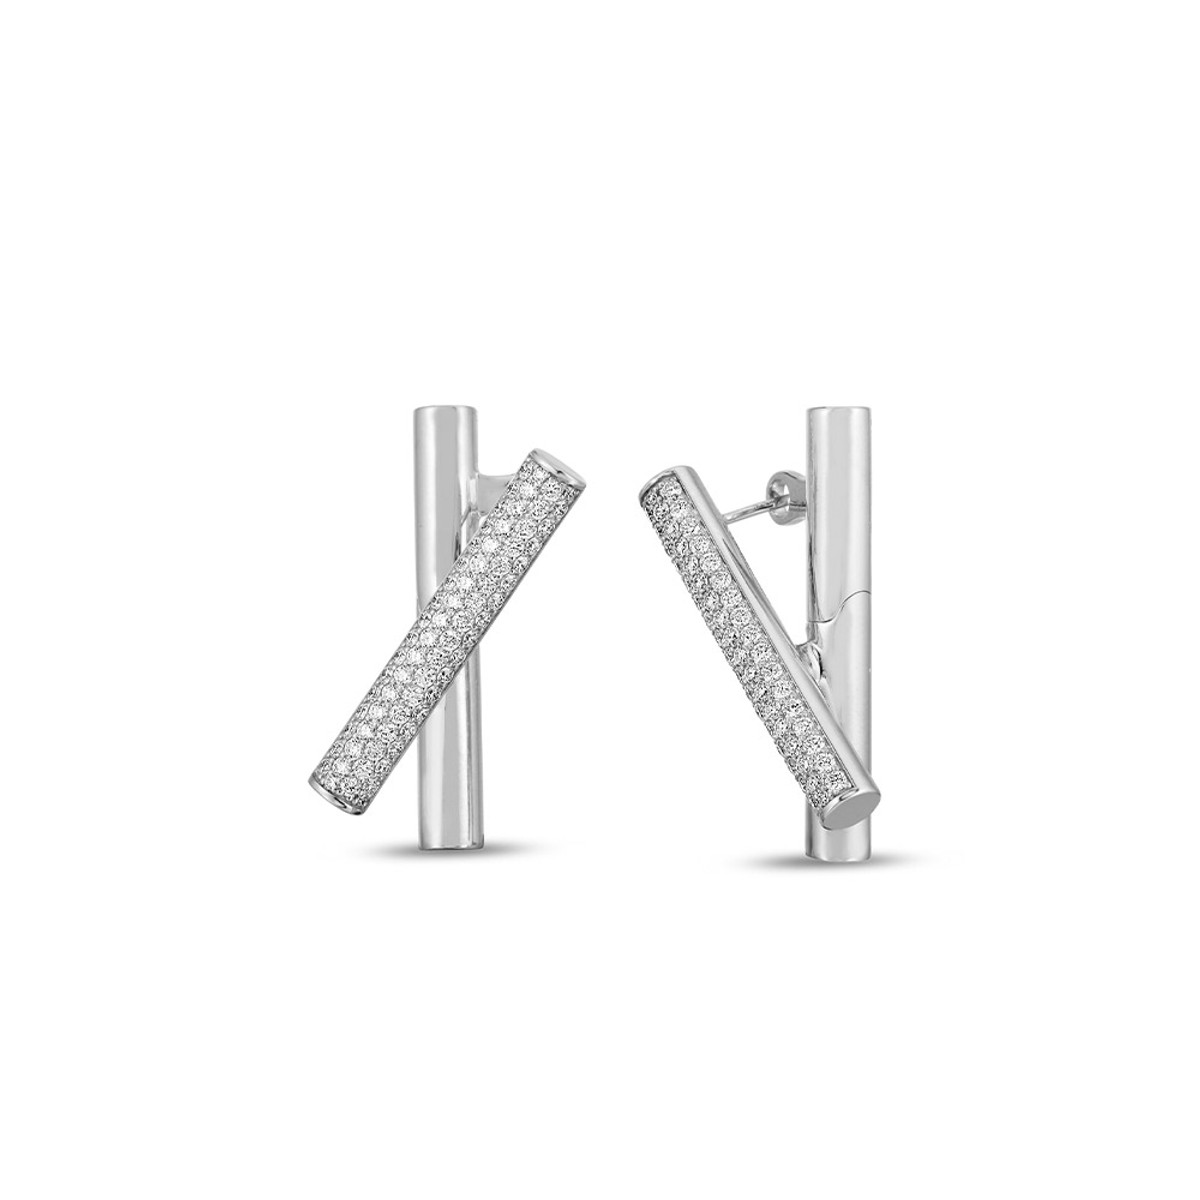 Roberto Coin 18K White Gold Domino Diamond Crossover Earrings-57364 Product Image